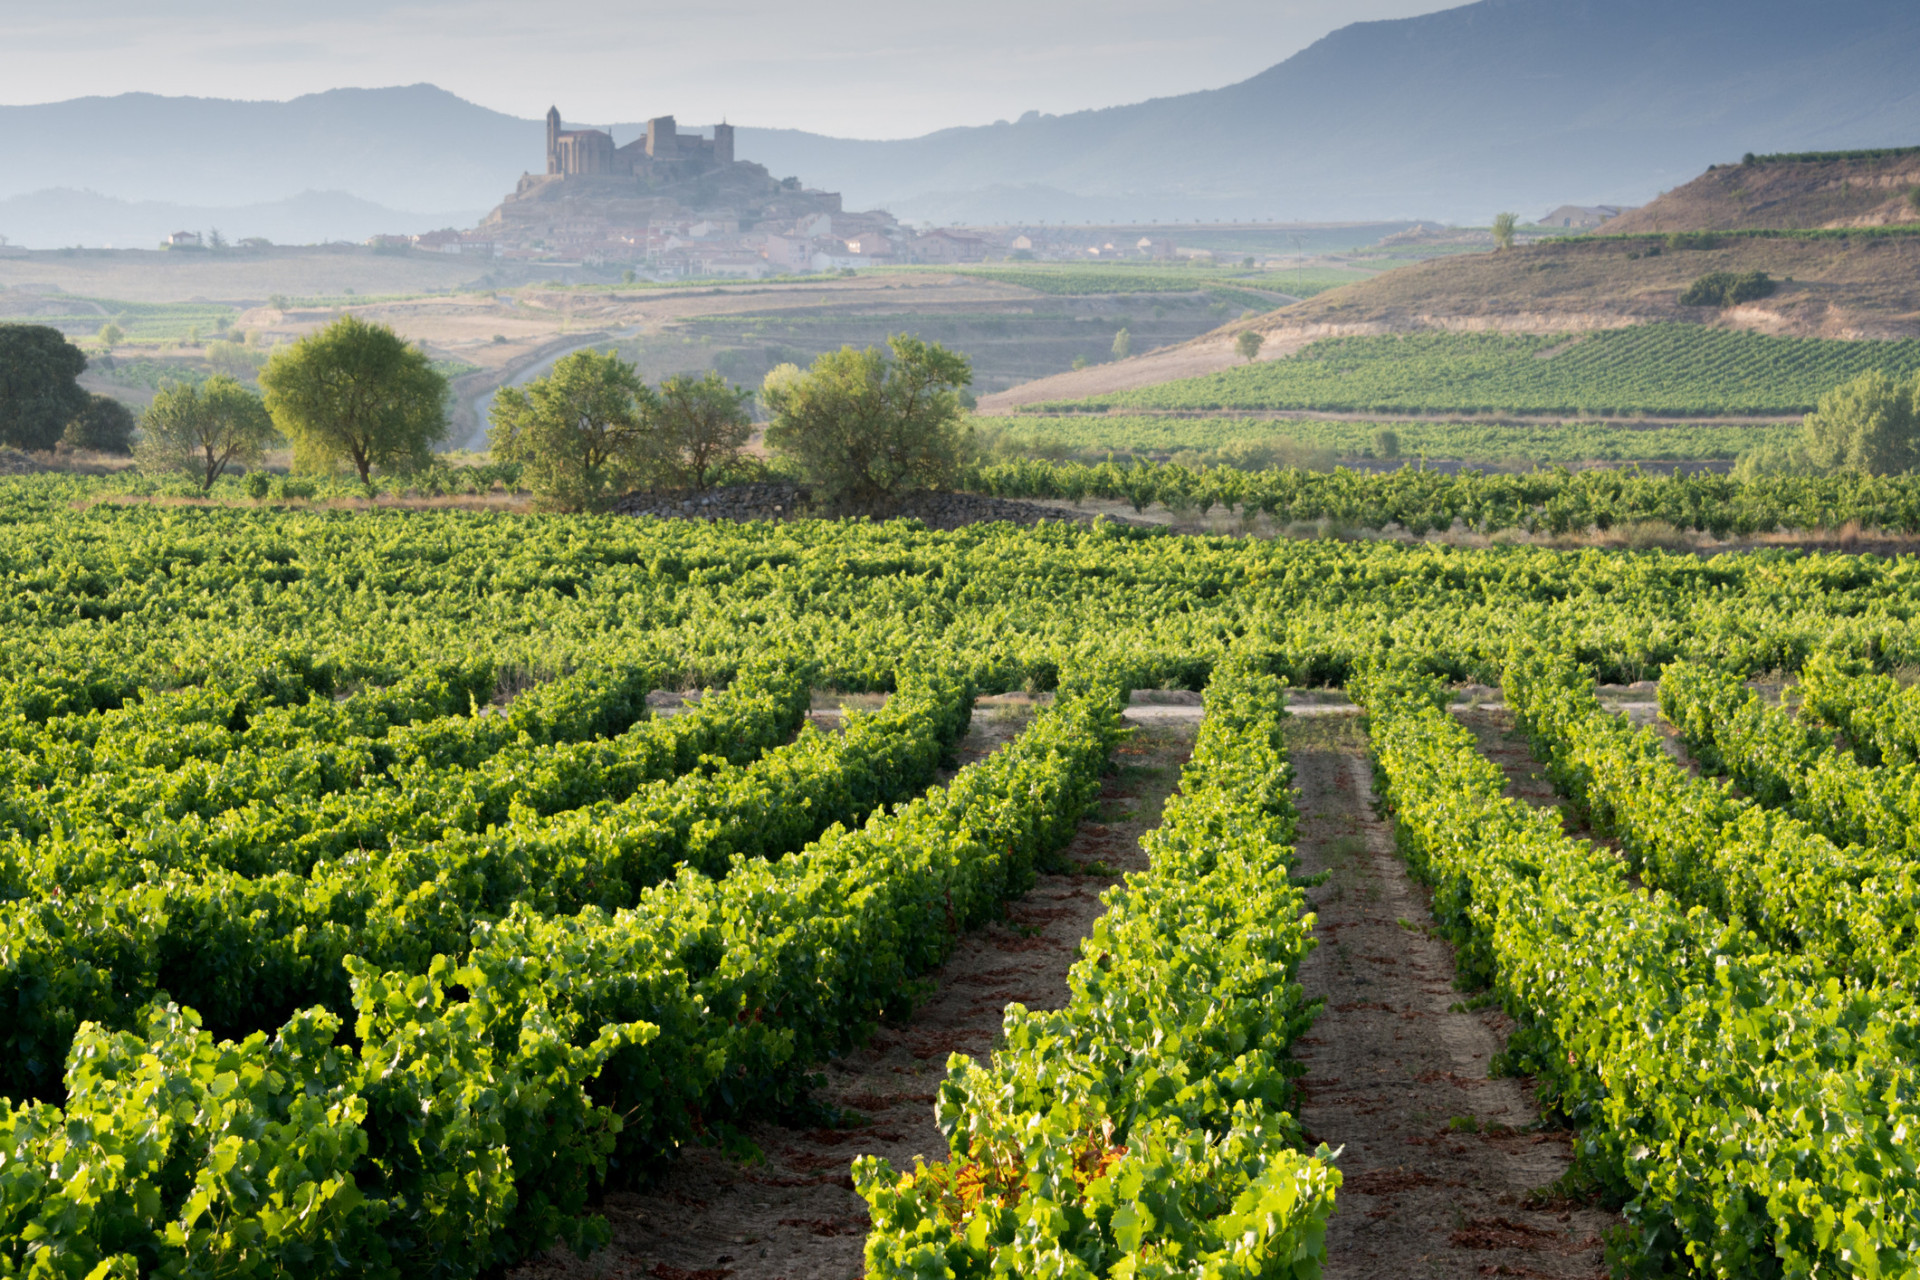 Exploring the Rioja Alta Wine Route is to discover Spain's wine-making heartland. Tempranillo, Graciano, and Viura are among the grape varieties cultivated.<p><a href="https://www.msn.com/en-us/community/channel/vid-7xx8mnucu55yw63we9va2gwr7uihbxwc68fxqp25x6tg4ftibpra?cvid=94631541bc0f4f89bfd59158d696ad7e">Follow us and access great exclusive content every day</a></p>